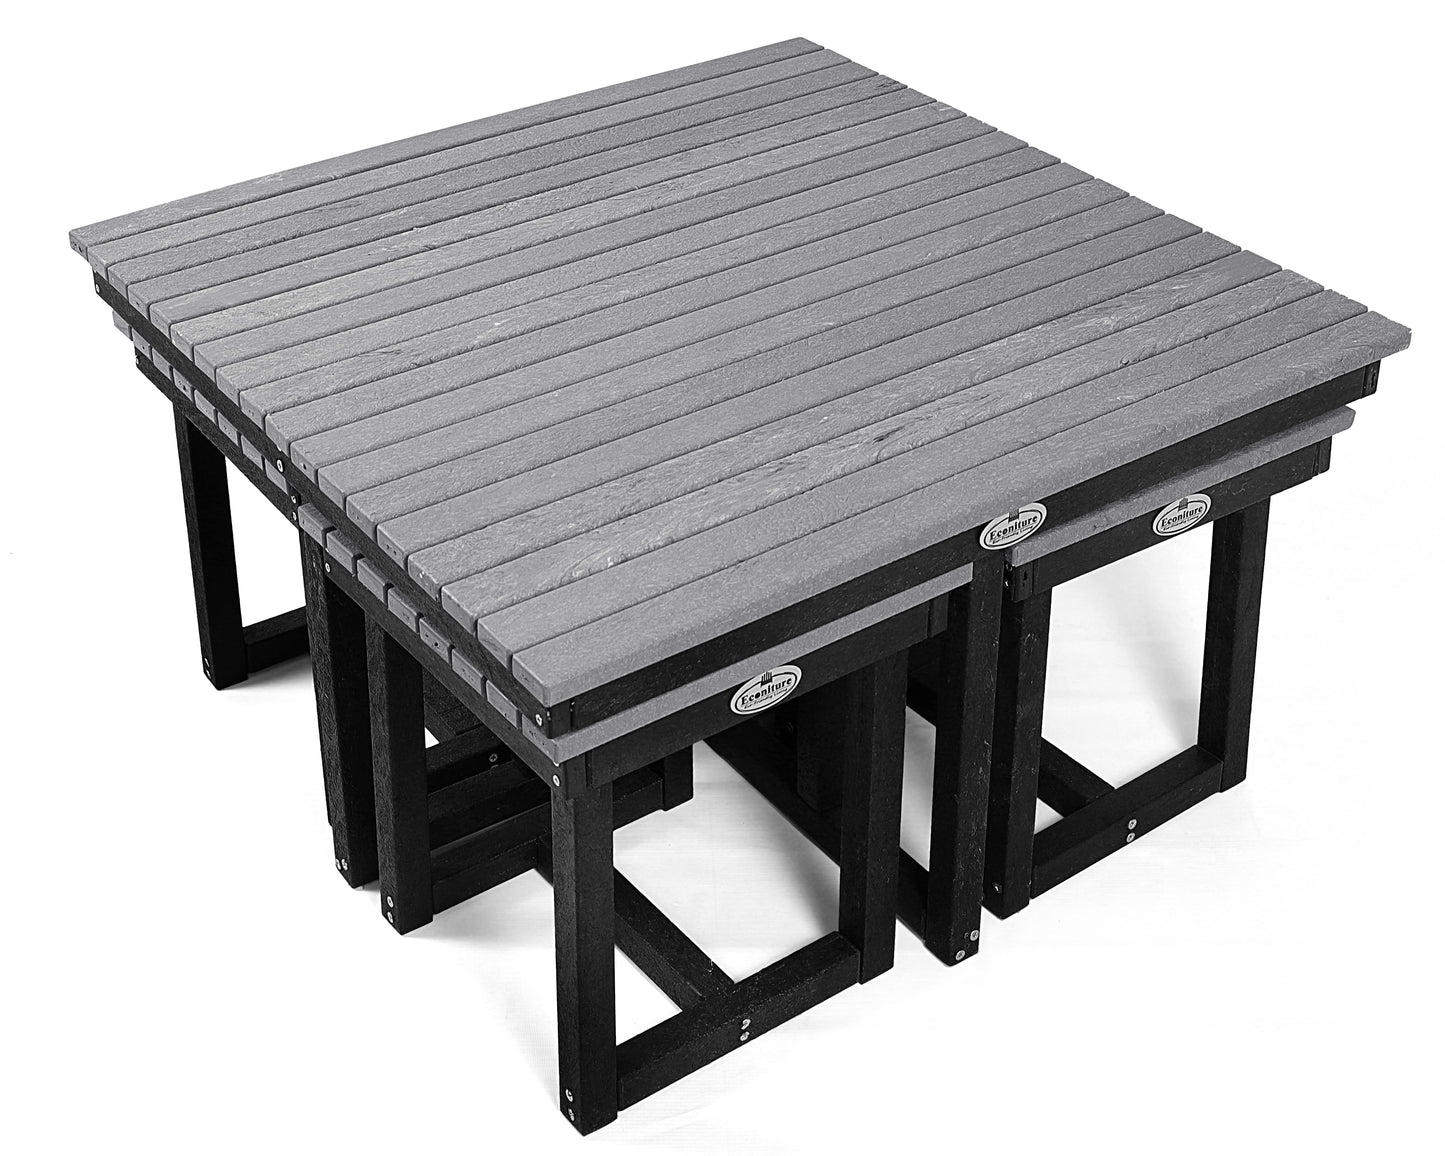 Eco Cross Coffee Table Set with 4 stools